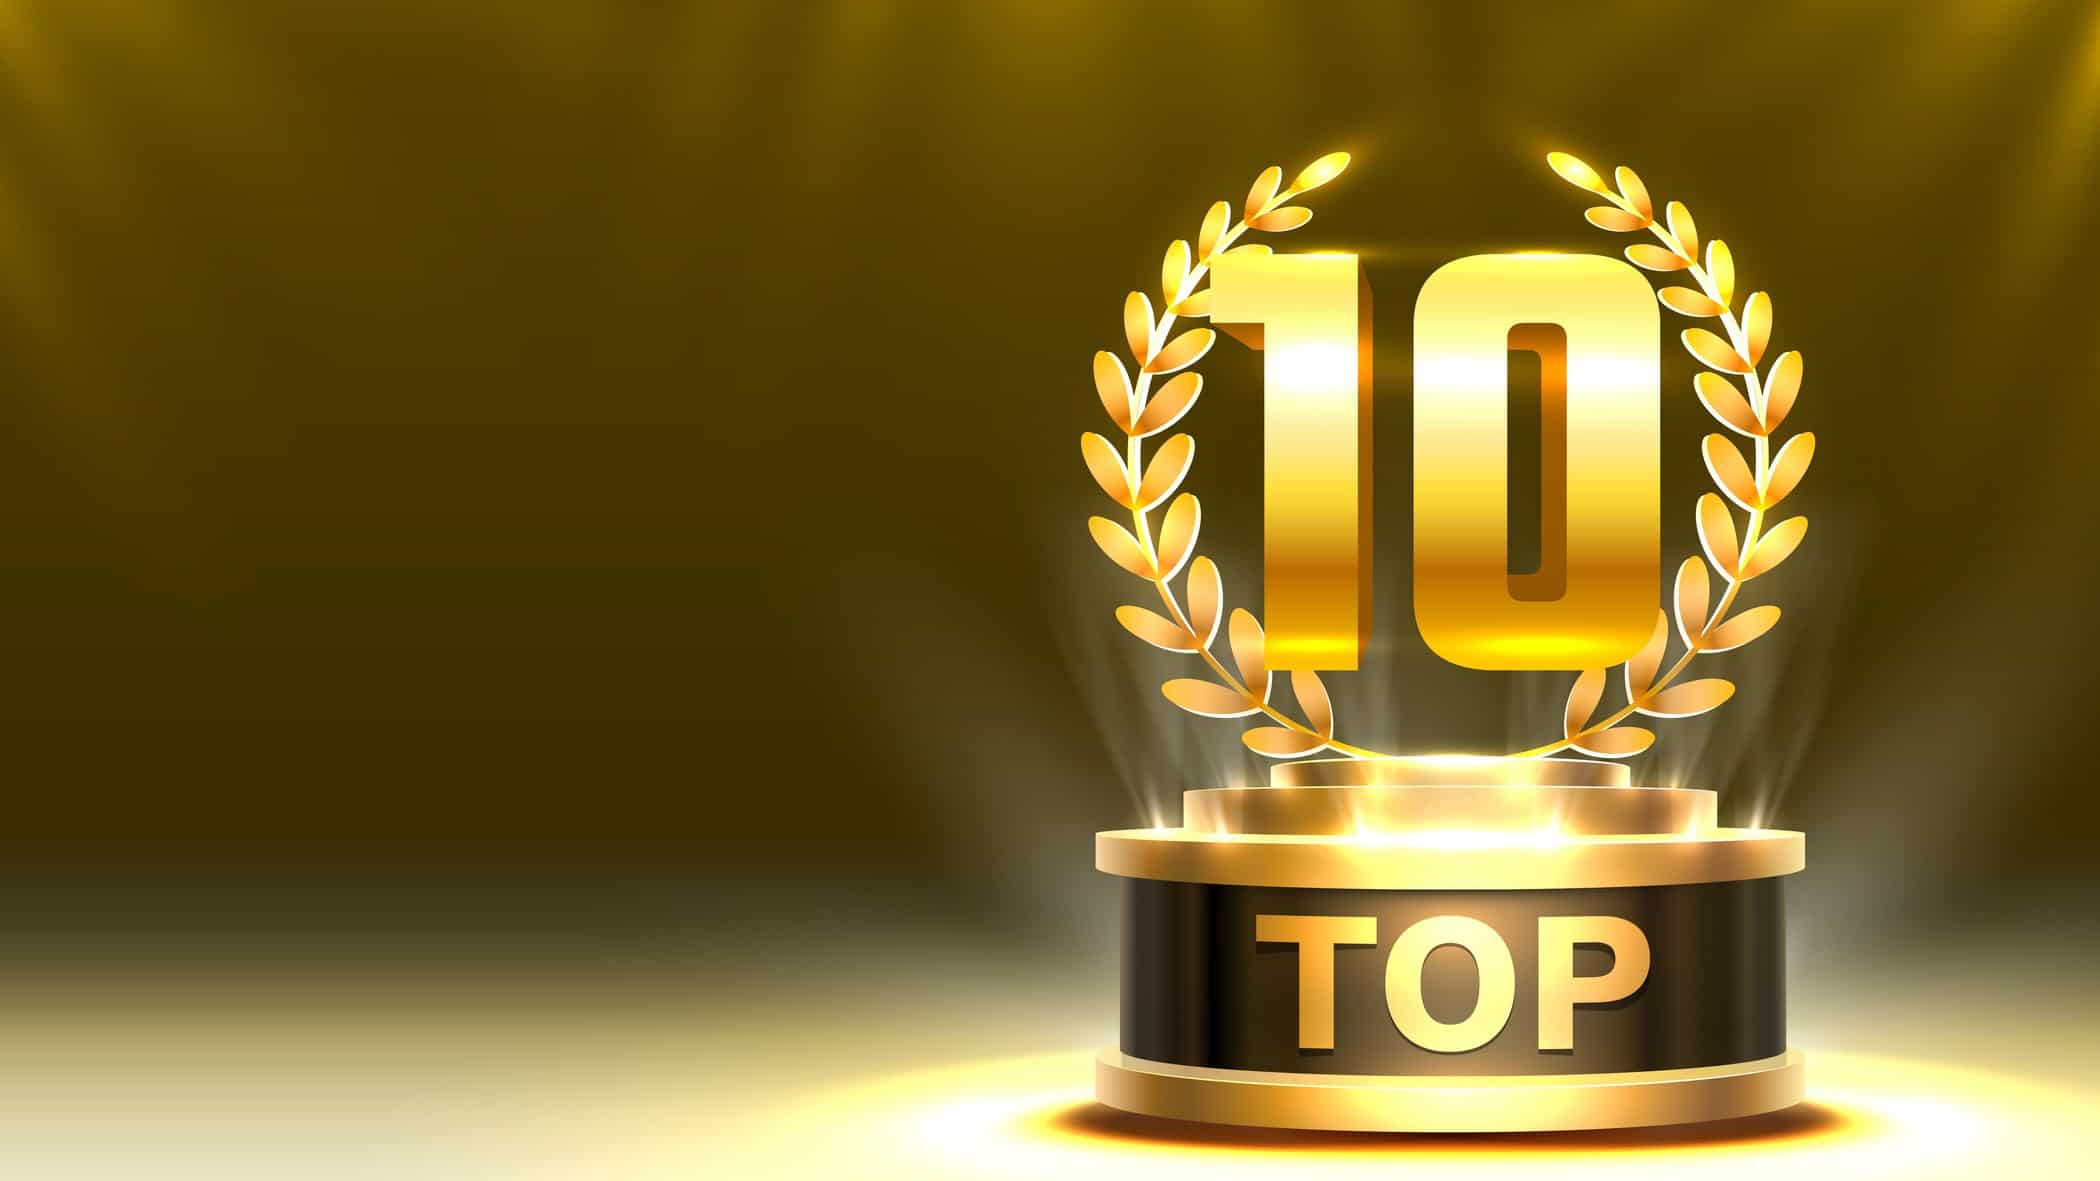 trophy depicting top 10, asx 200 shares